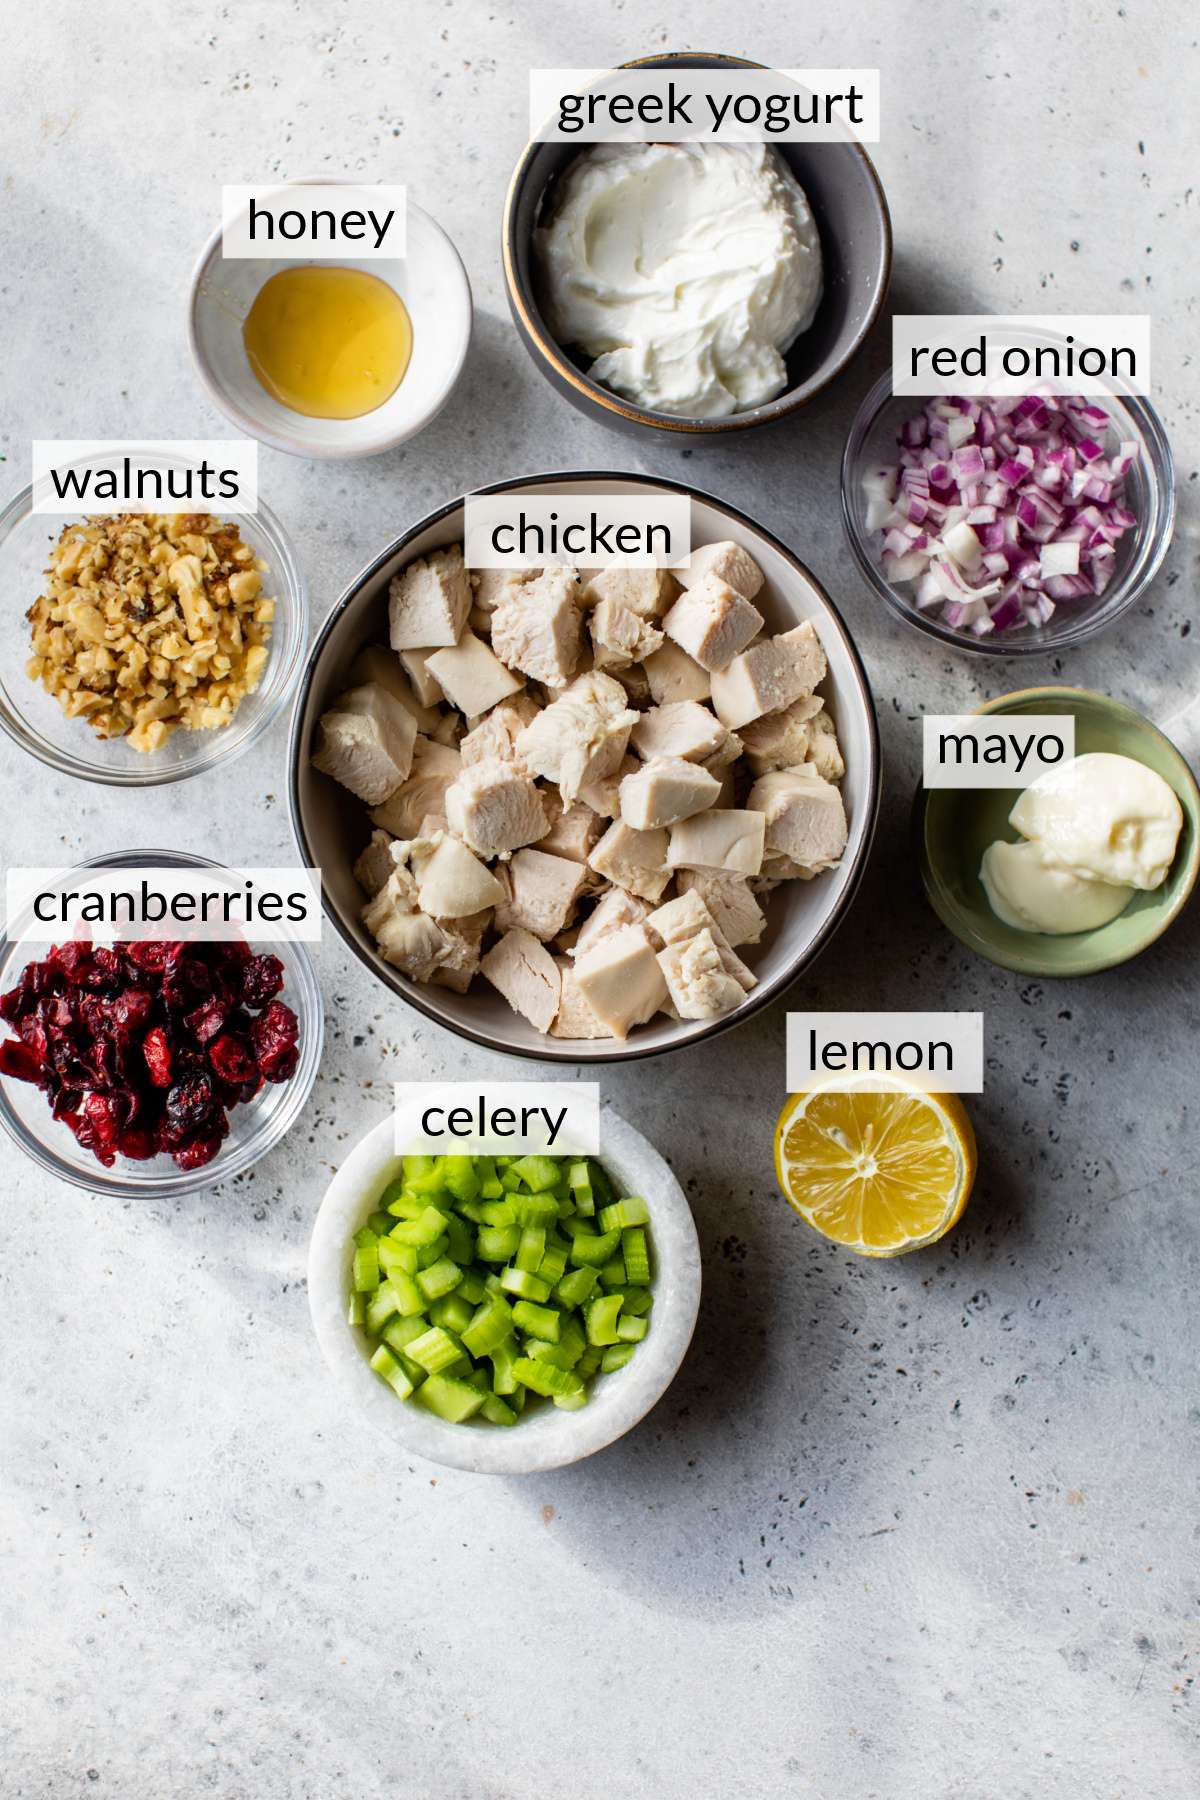 Chopped chicken in a bowl near other bowls of red onion, celery, walnuts, cranberries, Greek yogurt and mayo.